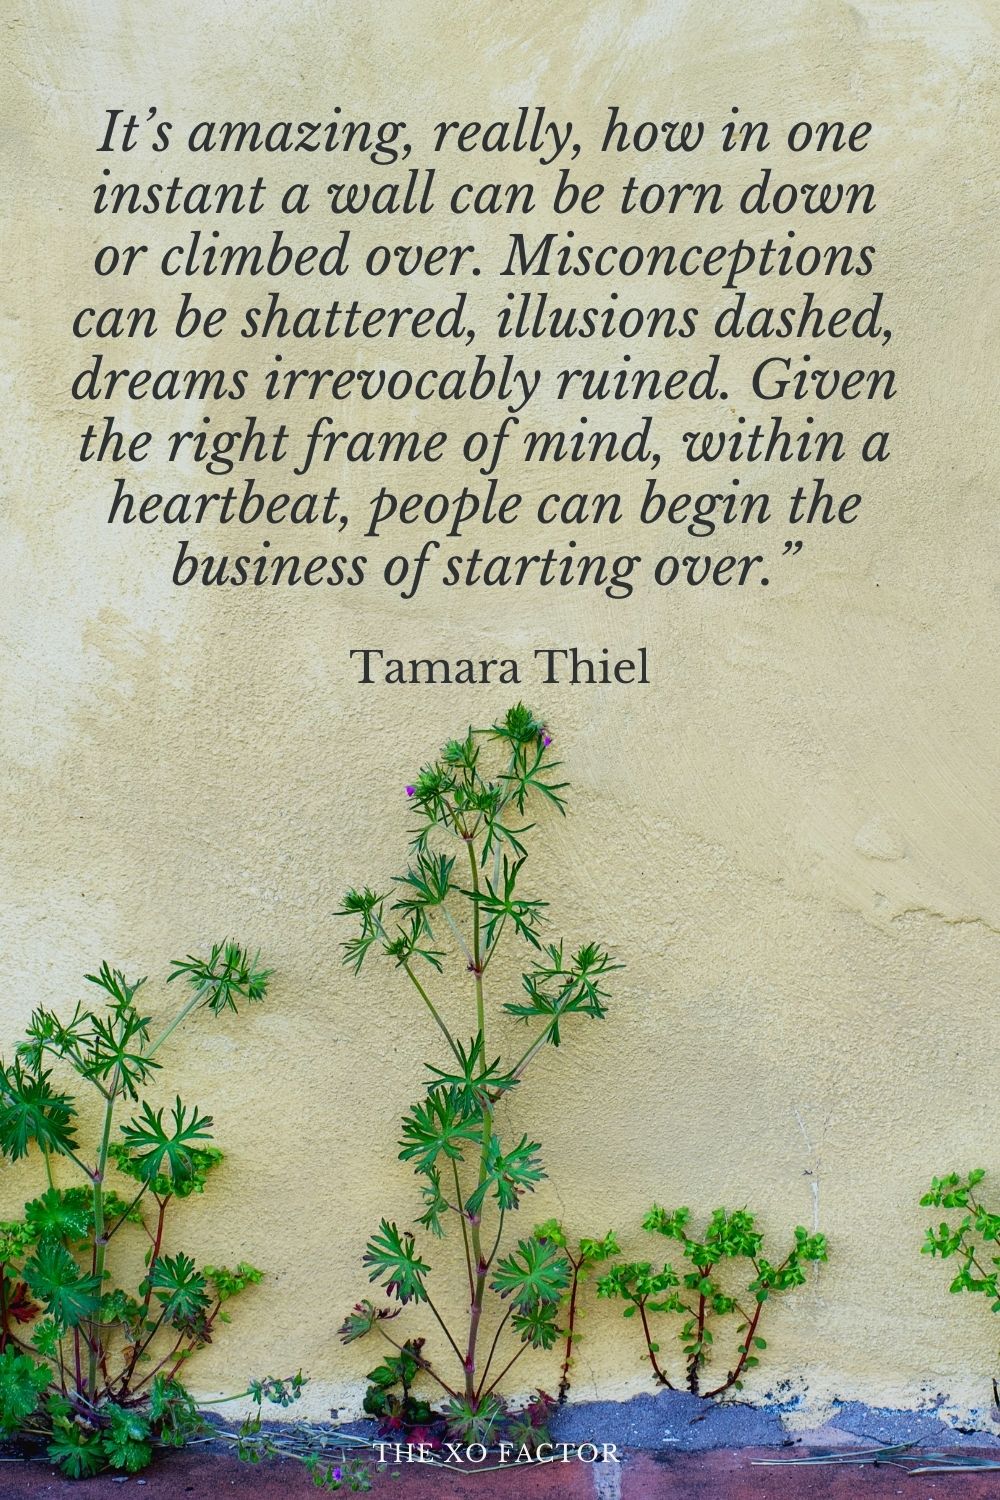 It’s amazing, really, how in one instant a wall can be torn down or climbed over. Misconceptions can be shattered, illusions dashed, dreams irrevocably ruined. Given the right frame of mind, within a heartbeat, people can begin the business of starting over.” Tamara Thiel